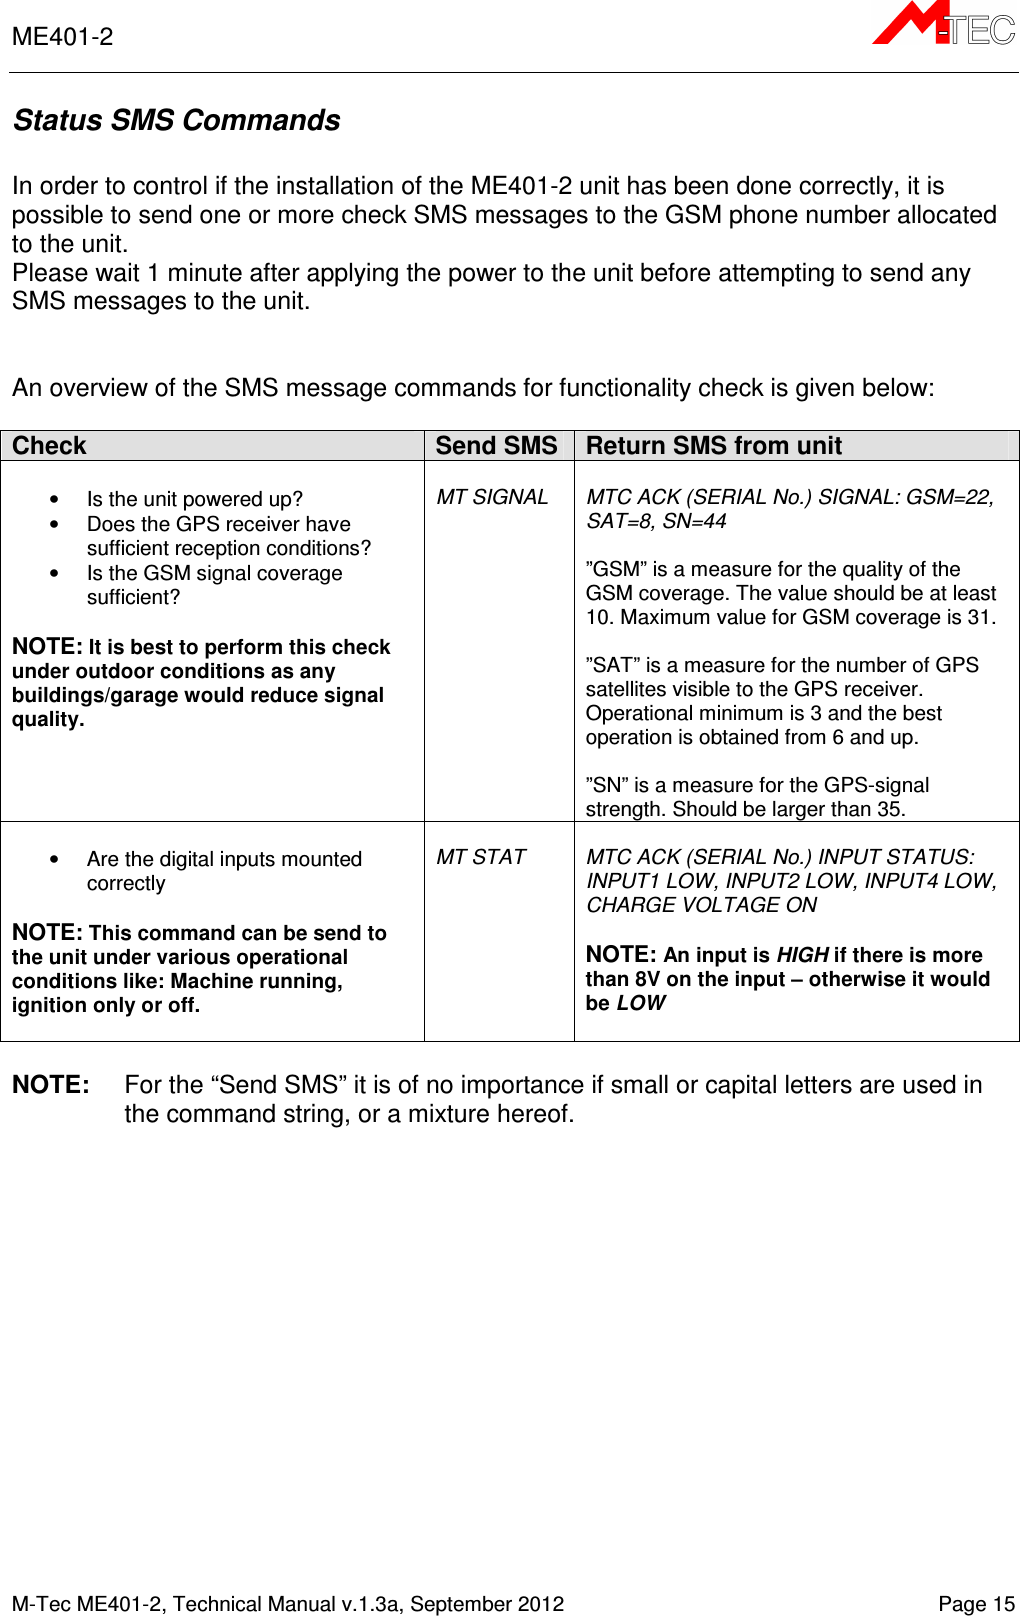 ME401-2       M-Tec ME401-2, Technical Manual v.1.3a, September 2012   Page 15 Status SMS Commands  In order to control if the installation of the ME401-2 unit has been done correctly, it is possible to send one or more check SMS messages to the GSM phone number allocated to the unit.  Please wait 1 minute after applying the power to the unit before attempting to send any SMS messages to the unit.   An overview of the SMS message commands for functionality check is given below:   Check Send SMS Return SMS from unit  •  Is the unit powered up? •  Does the GPS receiver have sufficient reception conditions? •  Is the GSM signal coverage sufficient?  NOTE: It is best to perform this check under outdoor conditions as any buildings/garage would reduce signal quality.  MT SIGNAL  MTC ACK (SERIAL No.) SIGNAL: GSM=22, SAT=8, SN=44  ”GSM” is a measure for the quality of the GSM coverage. The value should be at least 10. Maximum value for GSM coverage is 31.  ”SAT” is a measure for the number of GPS satellites visible to the GPS receiver. Operational minimum is 3 and the best operation is obtained from 6 and up.  ”SN” is a measure for the GPS-signal strength. Should be larger than 35.  •  Are the digital inputs mounted correctly  NOTE: This command can be send to the unit under various operational conditions like: Machine running, ignition only or off.   MT STAT  MTC ACK (SERIAL No.) INPUT STATUS: INPUT1 LOW, INPUT2 LOW, INPUT4 LOW, CHARGE VOLTAGE ON  NOTE: An input is HIGH if there is more than 8V on the input – otherwise it would be LOW  NOTE:  For the “Send SMS” it is of no importance if small or capital letters are used in the command string, or a mixture hereof.    